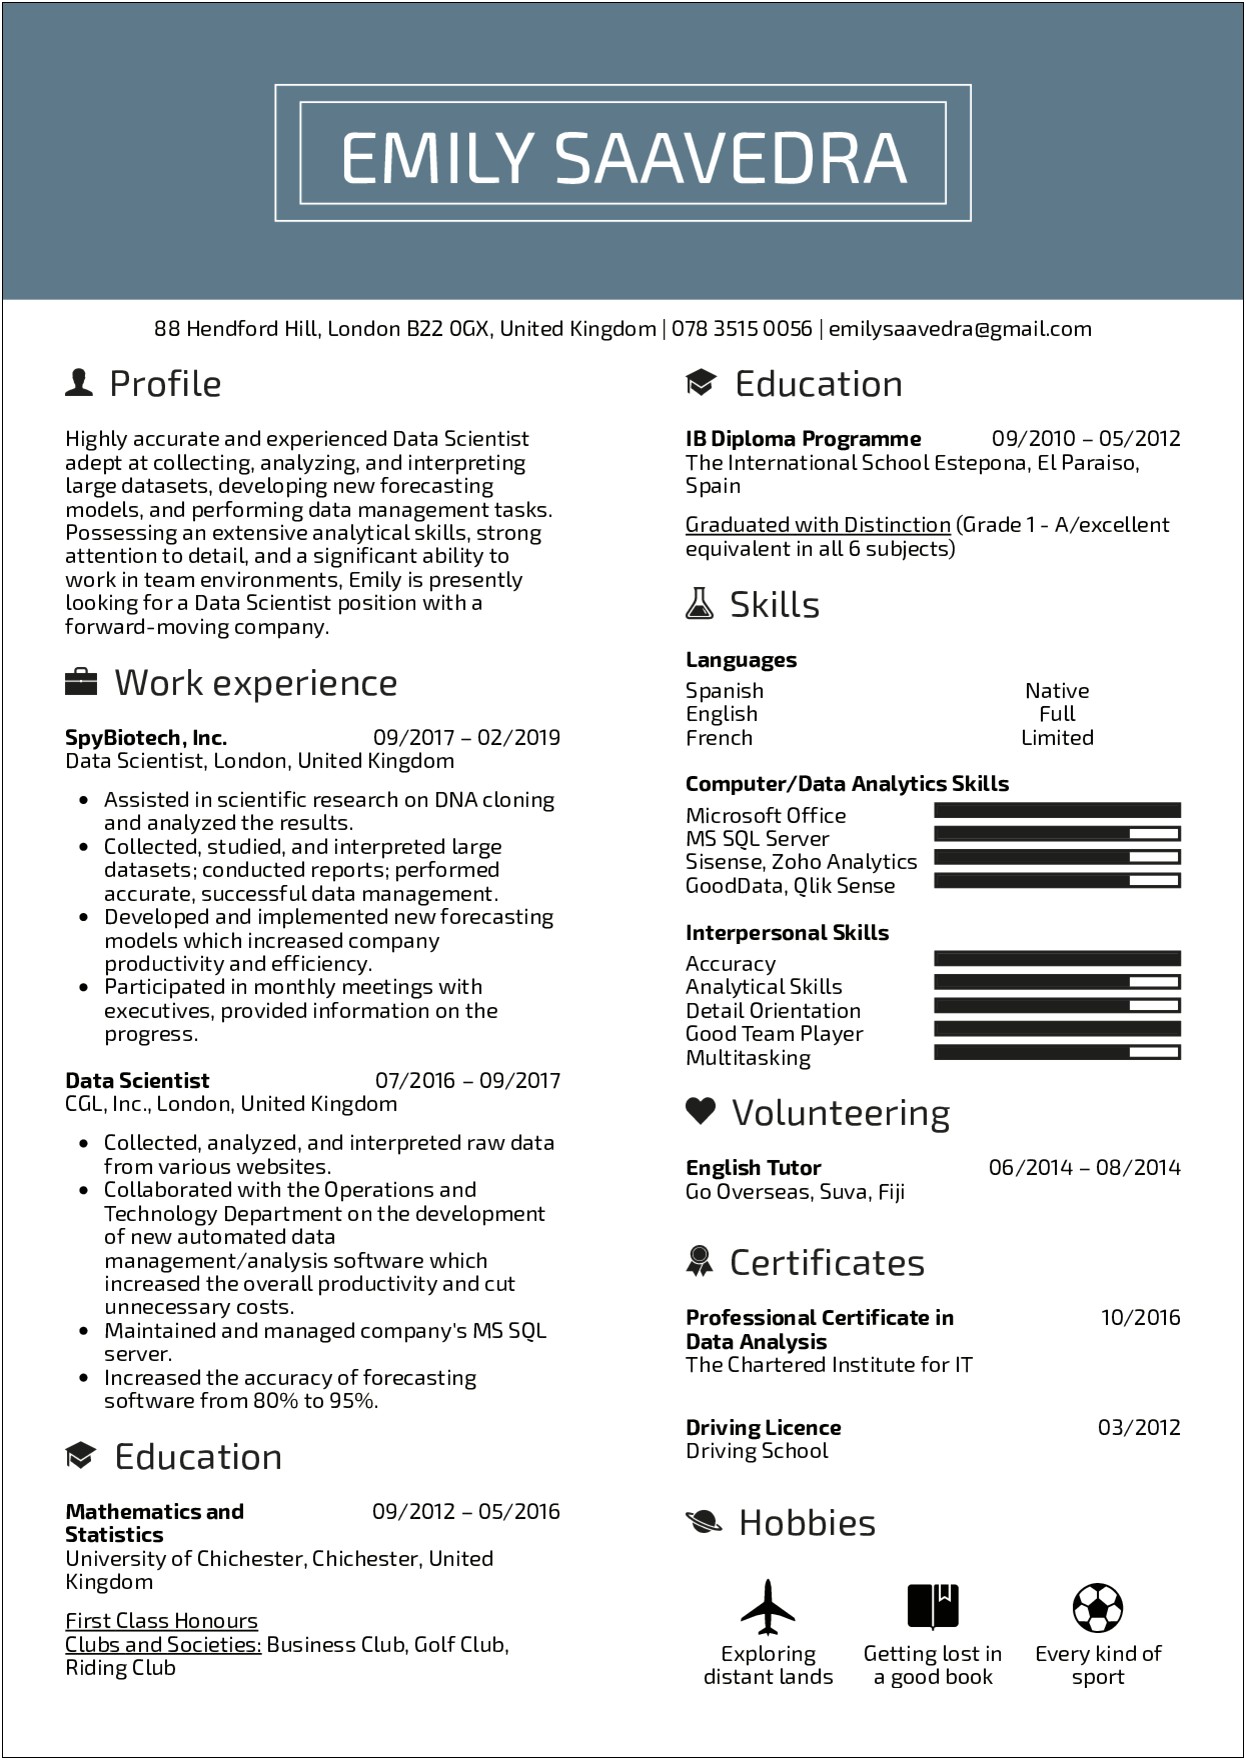 Resume Objective For A Data Scientist